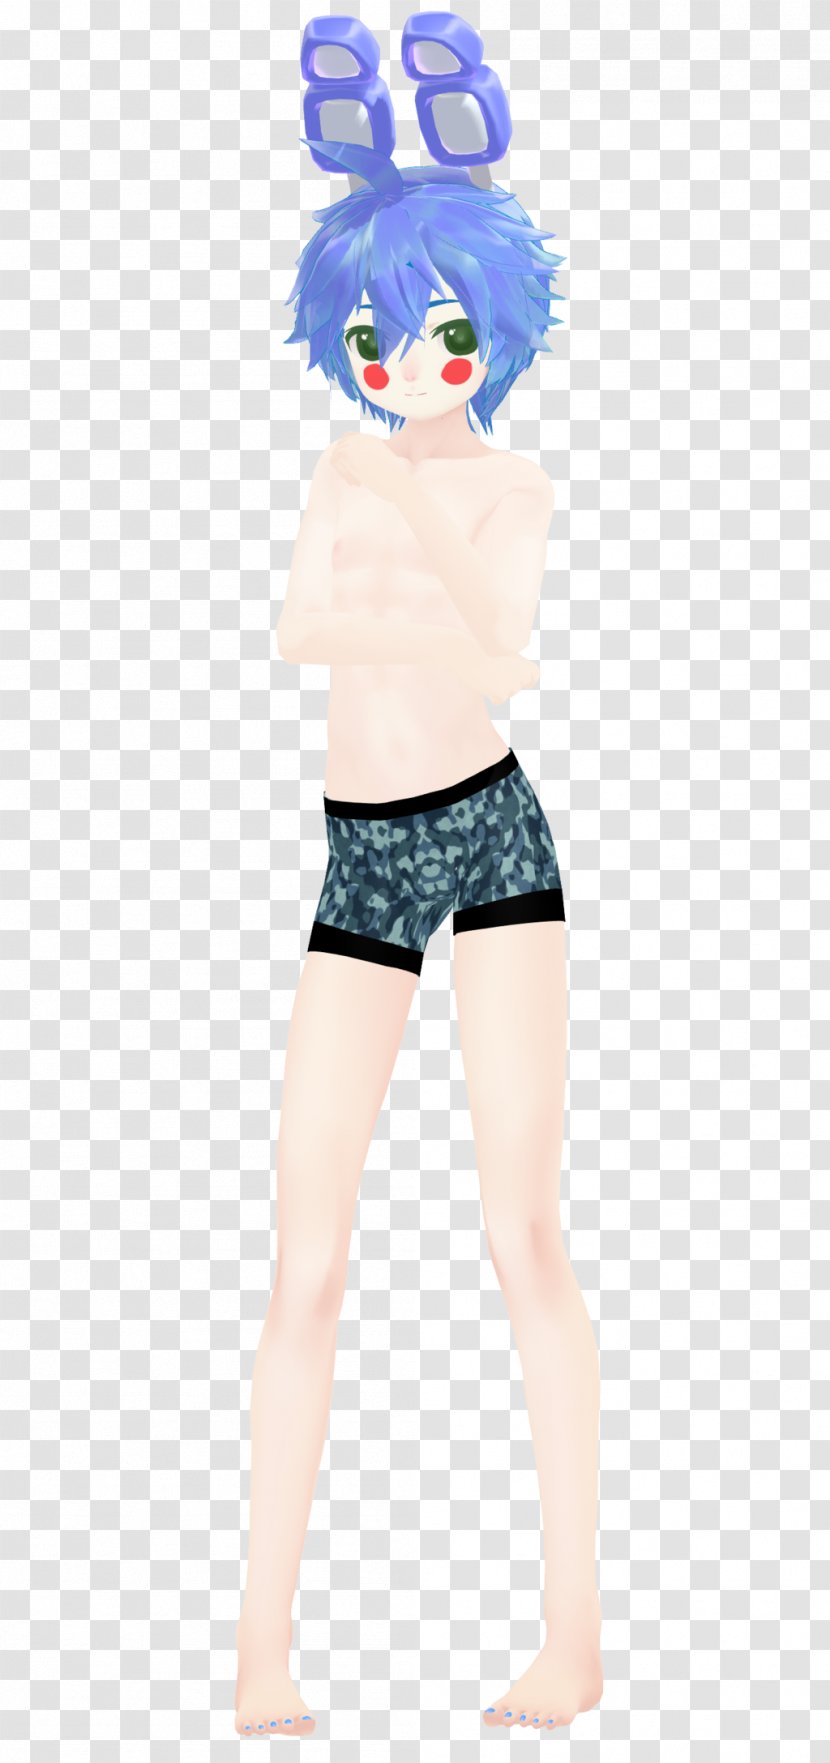 Five Nights At Freddy's Toy Jump Scare Boy Adult - Frame Transparent PNG